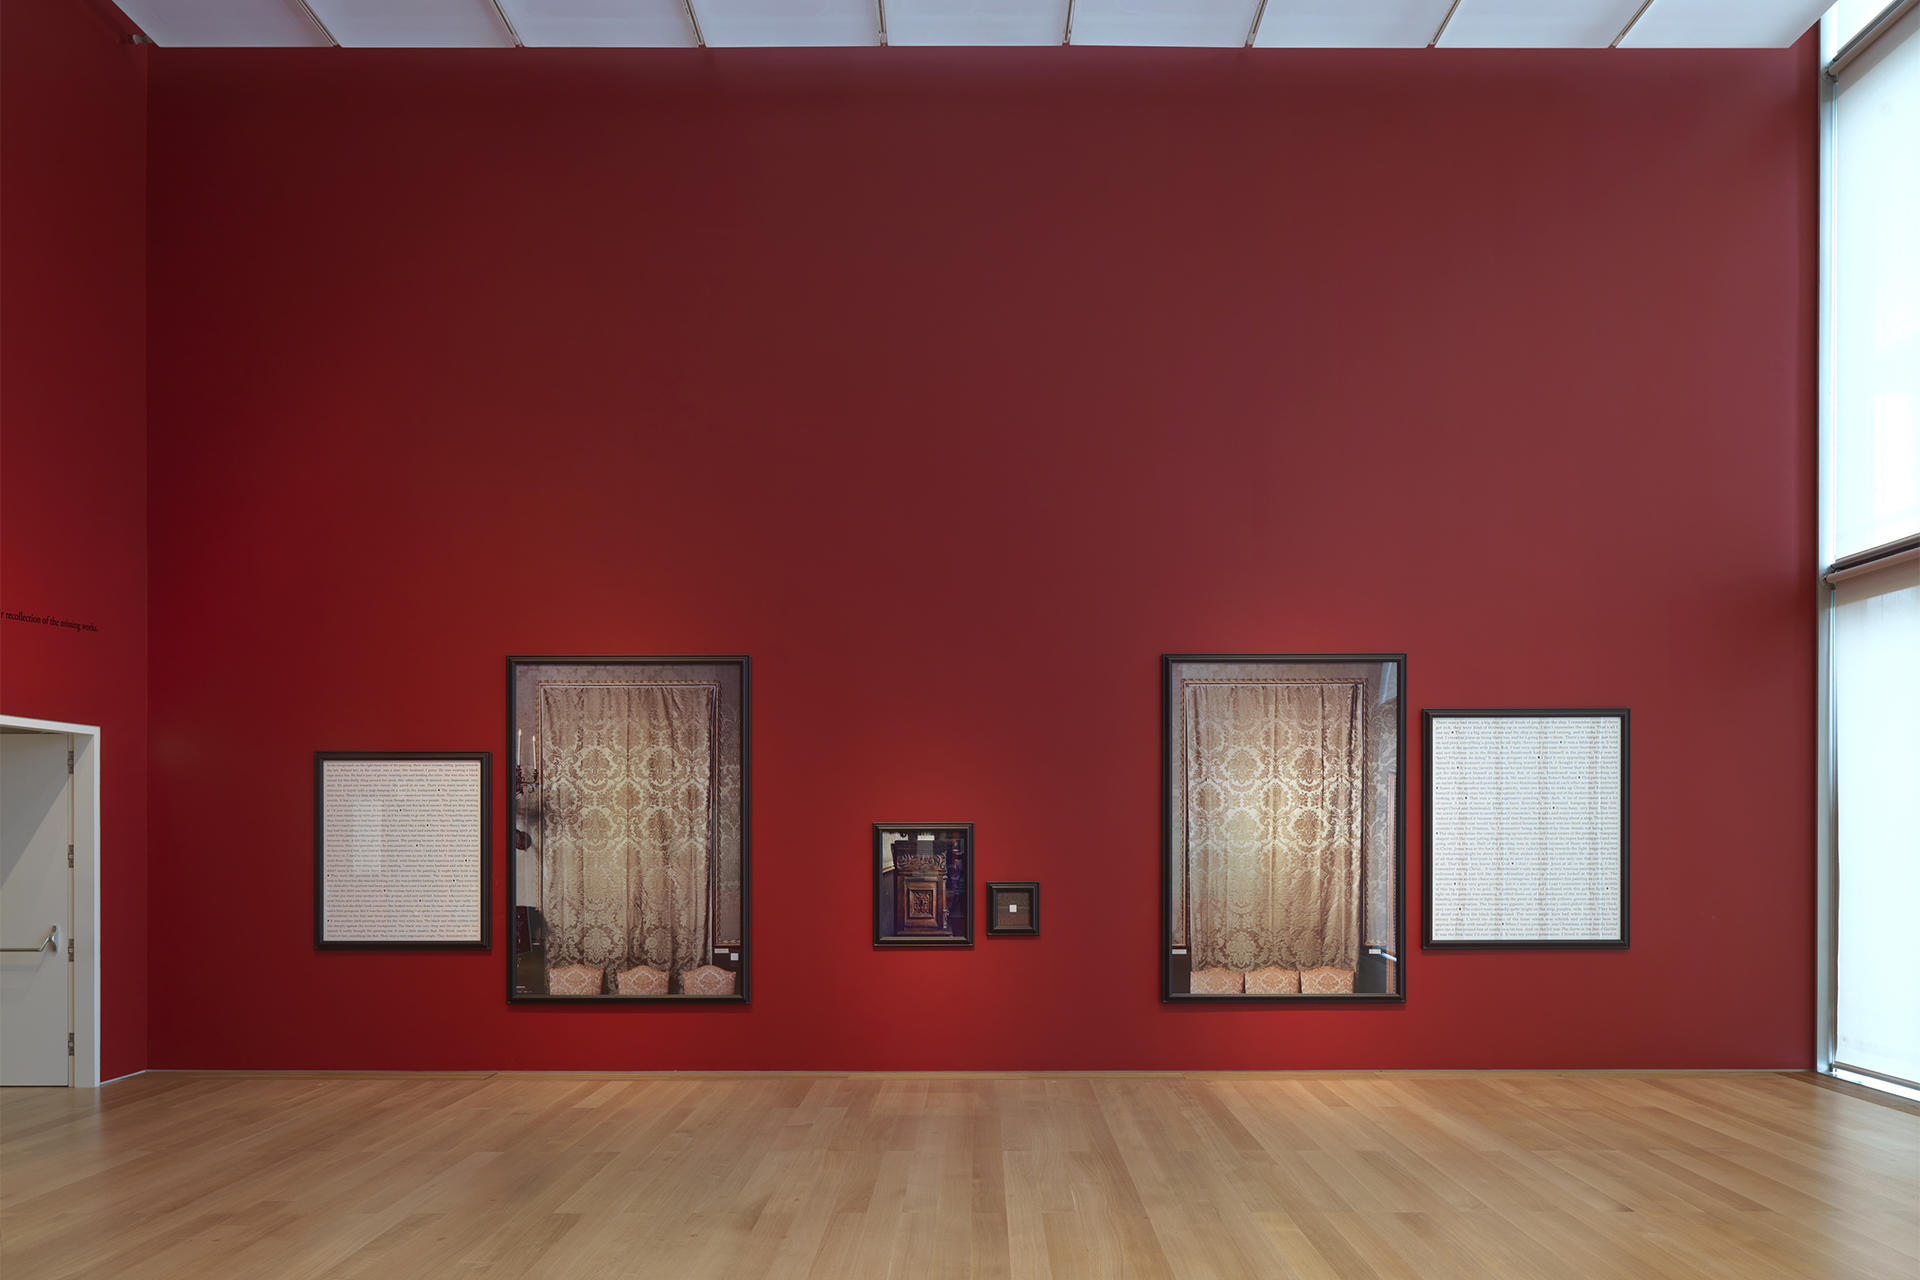 Sophie Calle: Last Seen…, installation view, ©1991 Sophie Calle / Artists Rights Society (ARS), New York / ADAGP, Paris. Courtesy of Sophie Calle, Paula Cooper Gallery, New York, and Isabella Stewart Gardner Museum, Boston.